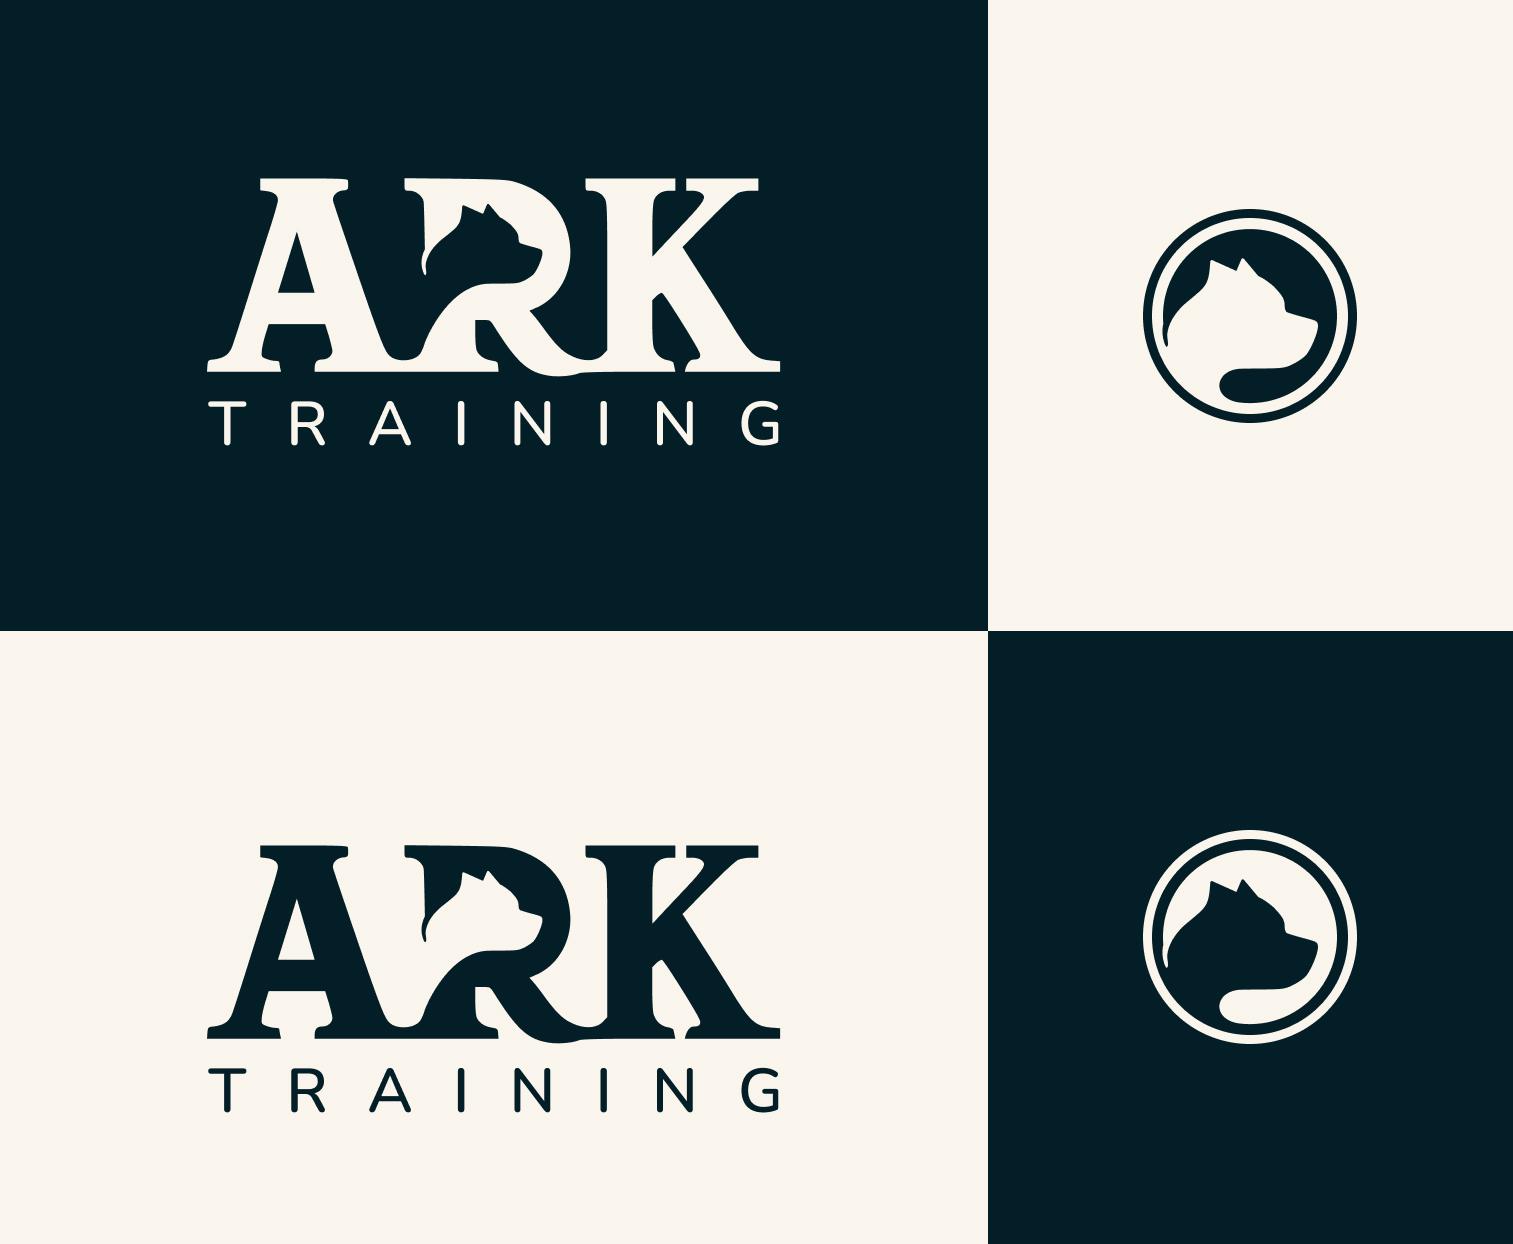 Professional dog training logo symbolizing trust and expertise. This sleek, modern design features a stylized dog silhouette, perfect for dog trainers looking to establish a credible brand presence online.